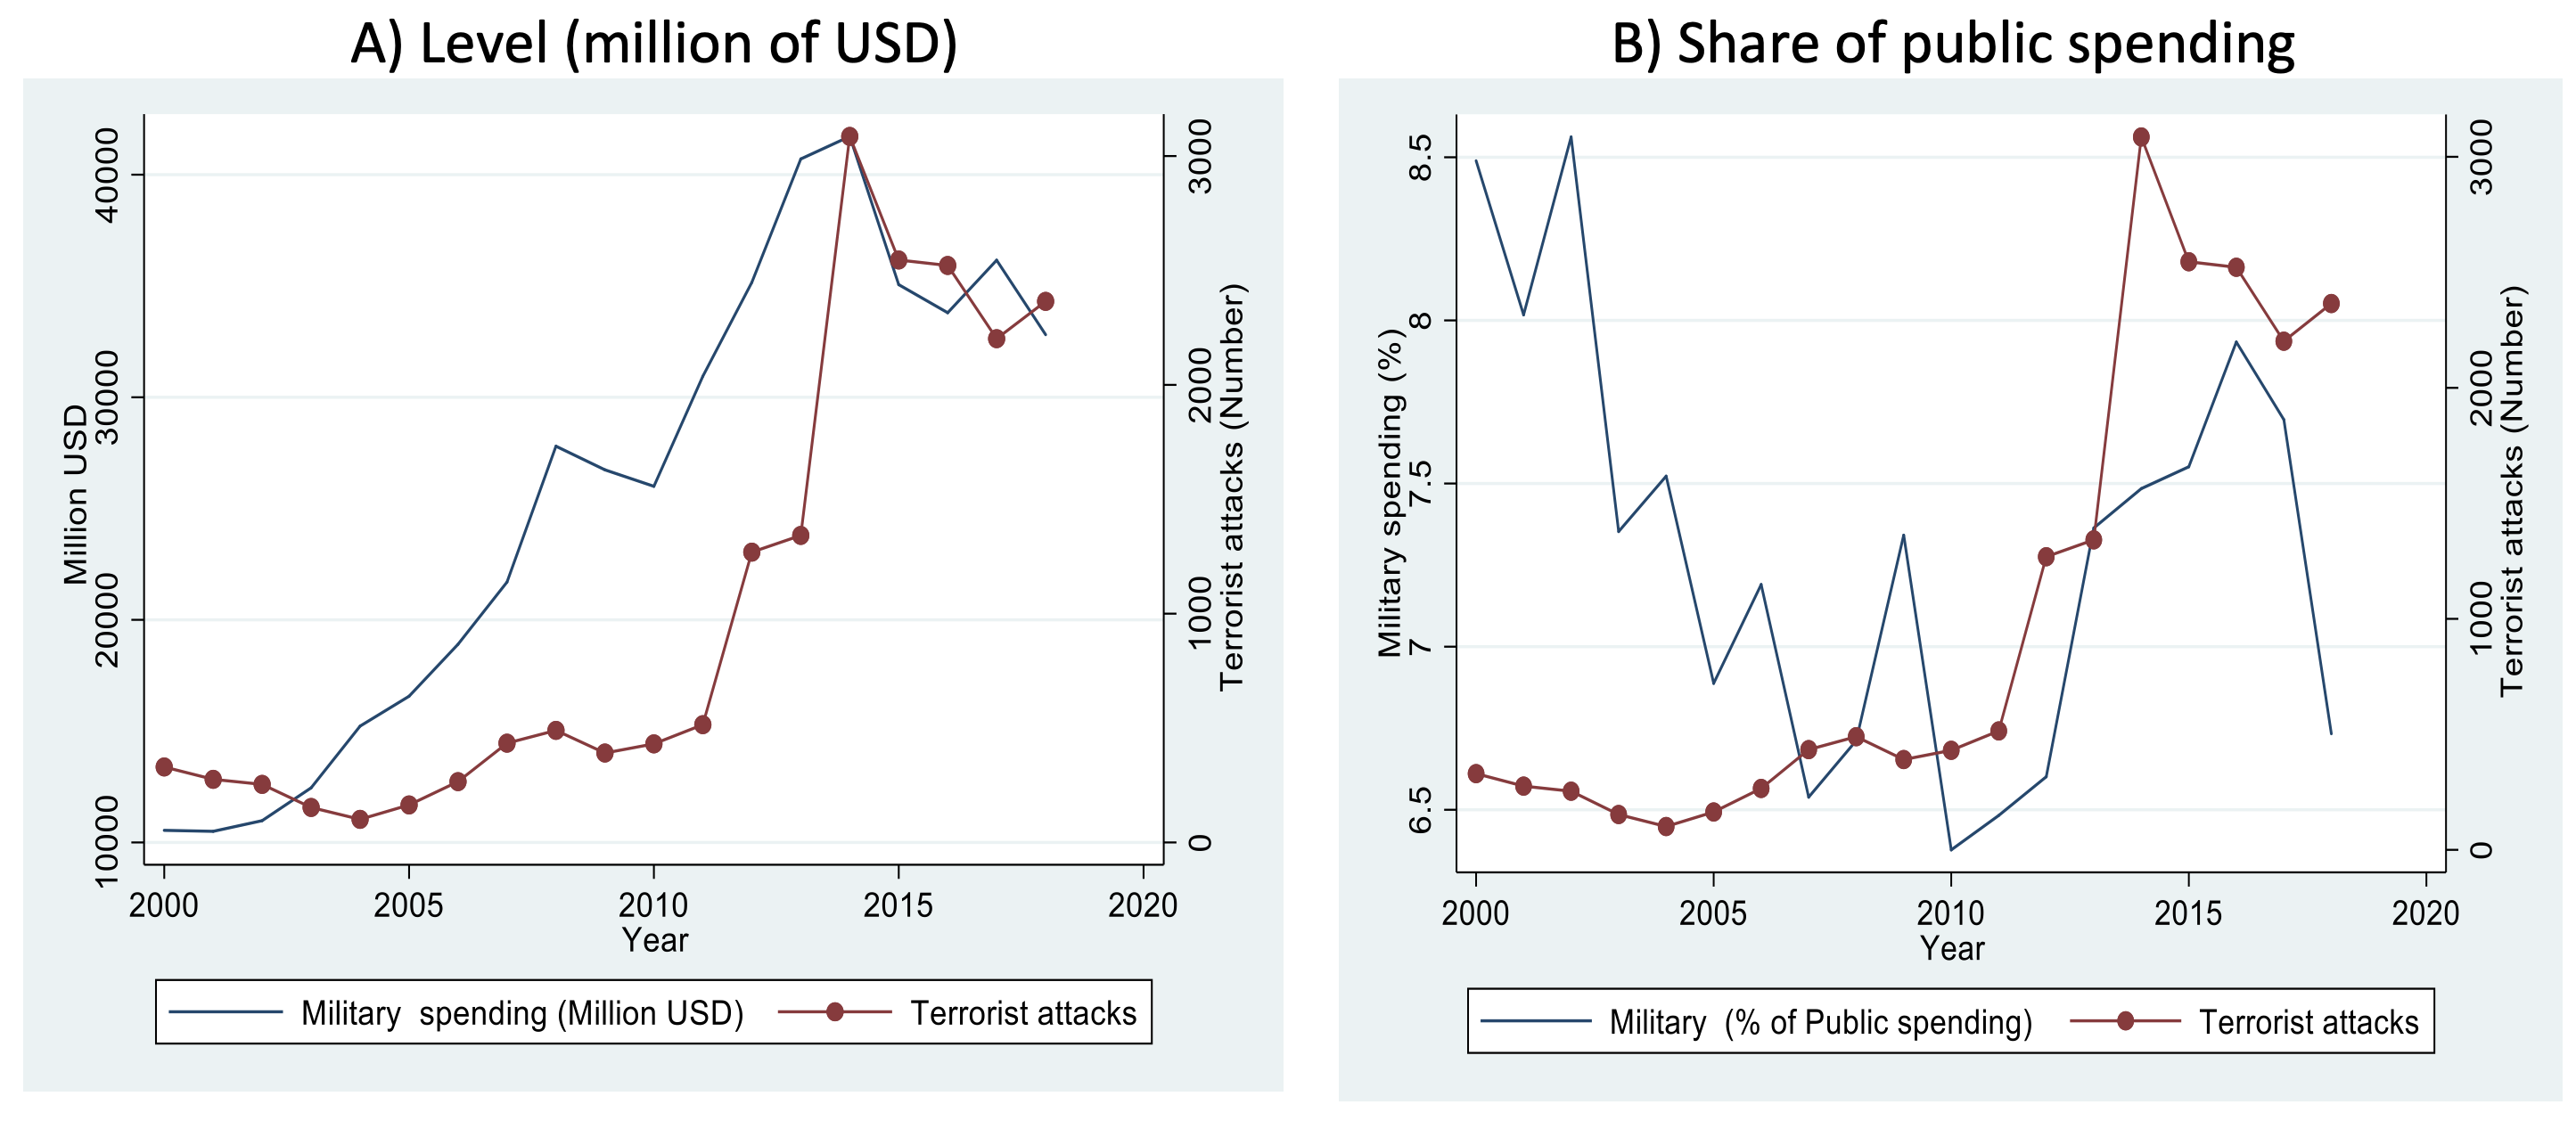 Figure 1 Terrorist attacks and military expenditures in Africa, 2000-2018